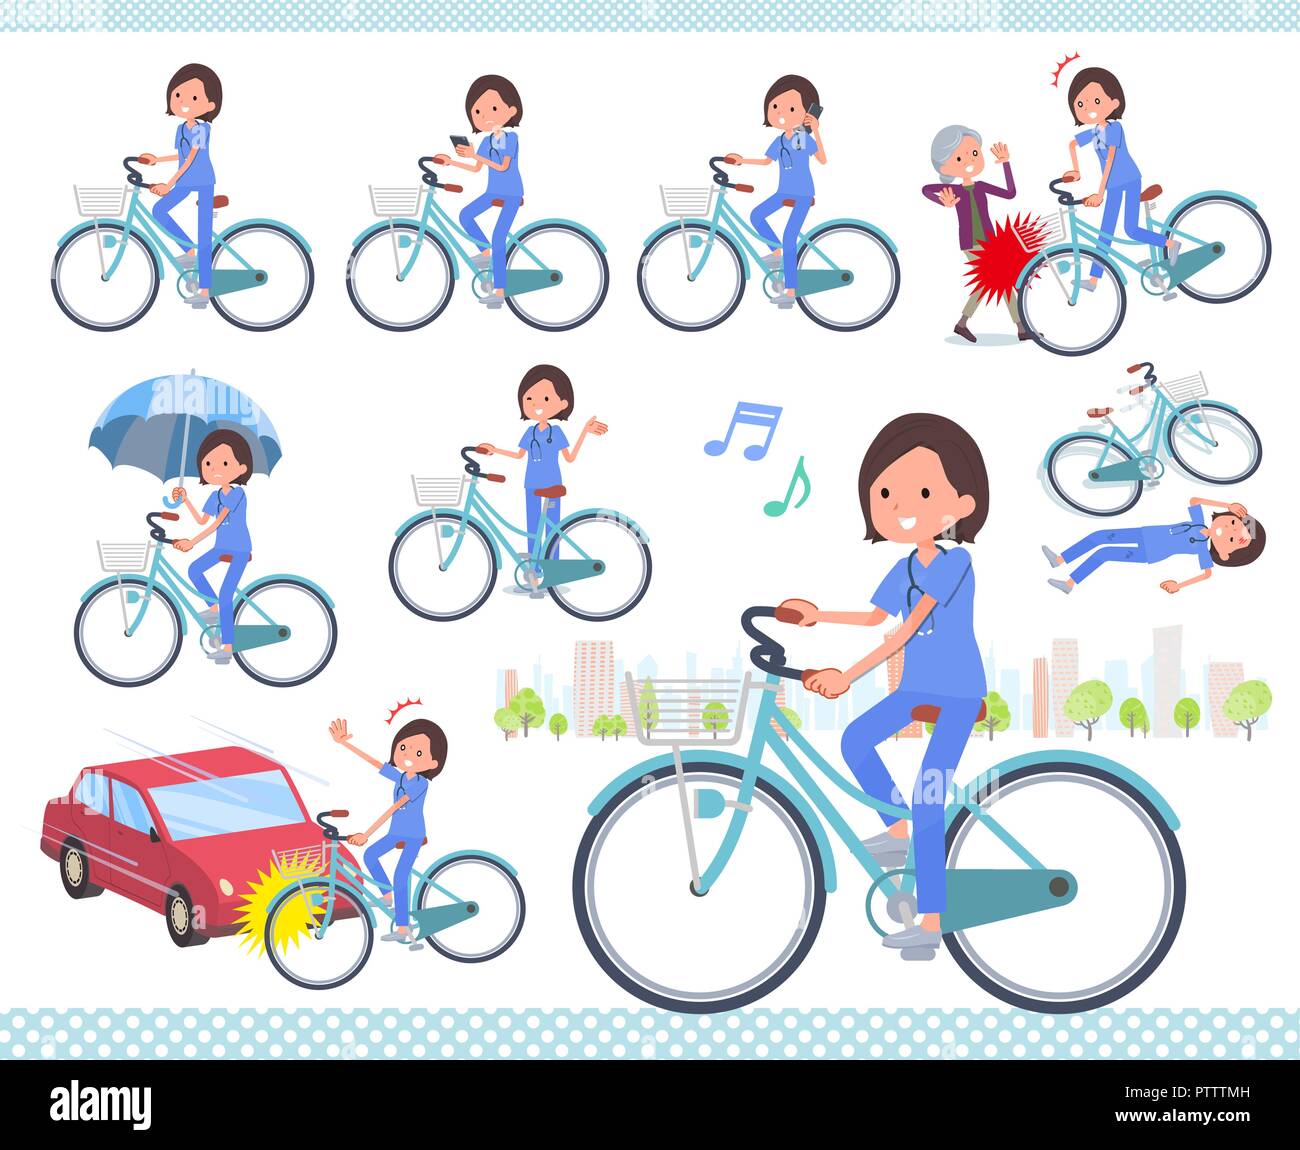 A set of Surgical Doctor women riding a city cycle.There are actions on manners and troubles.It's vector art so it's easy to edit. Stock Vector